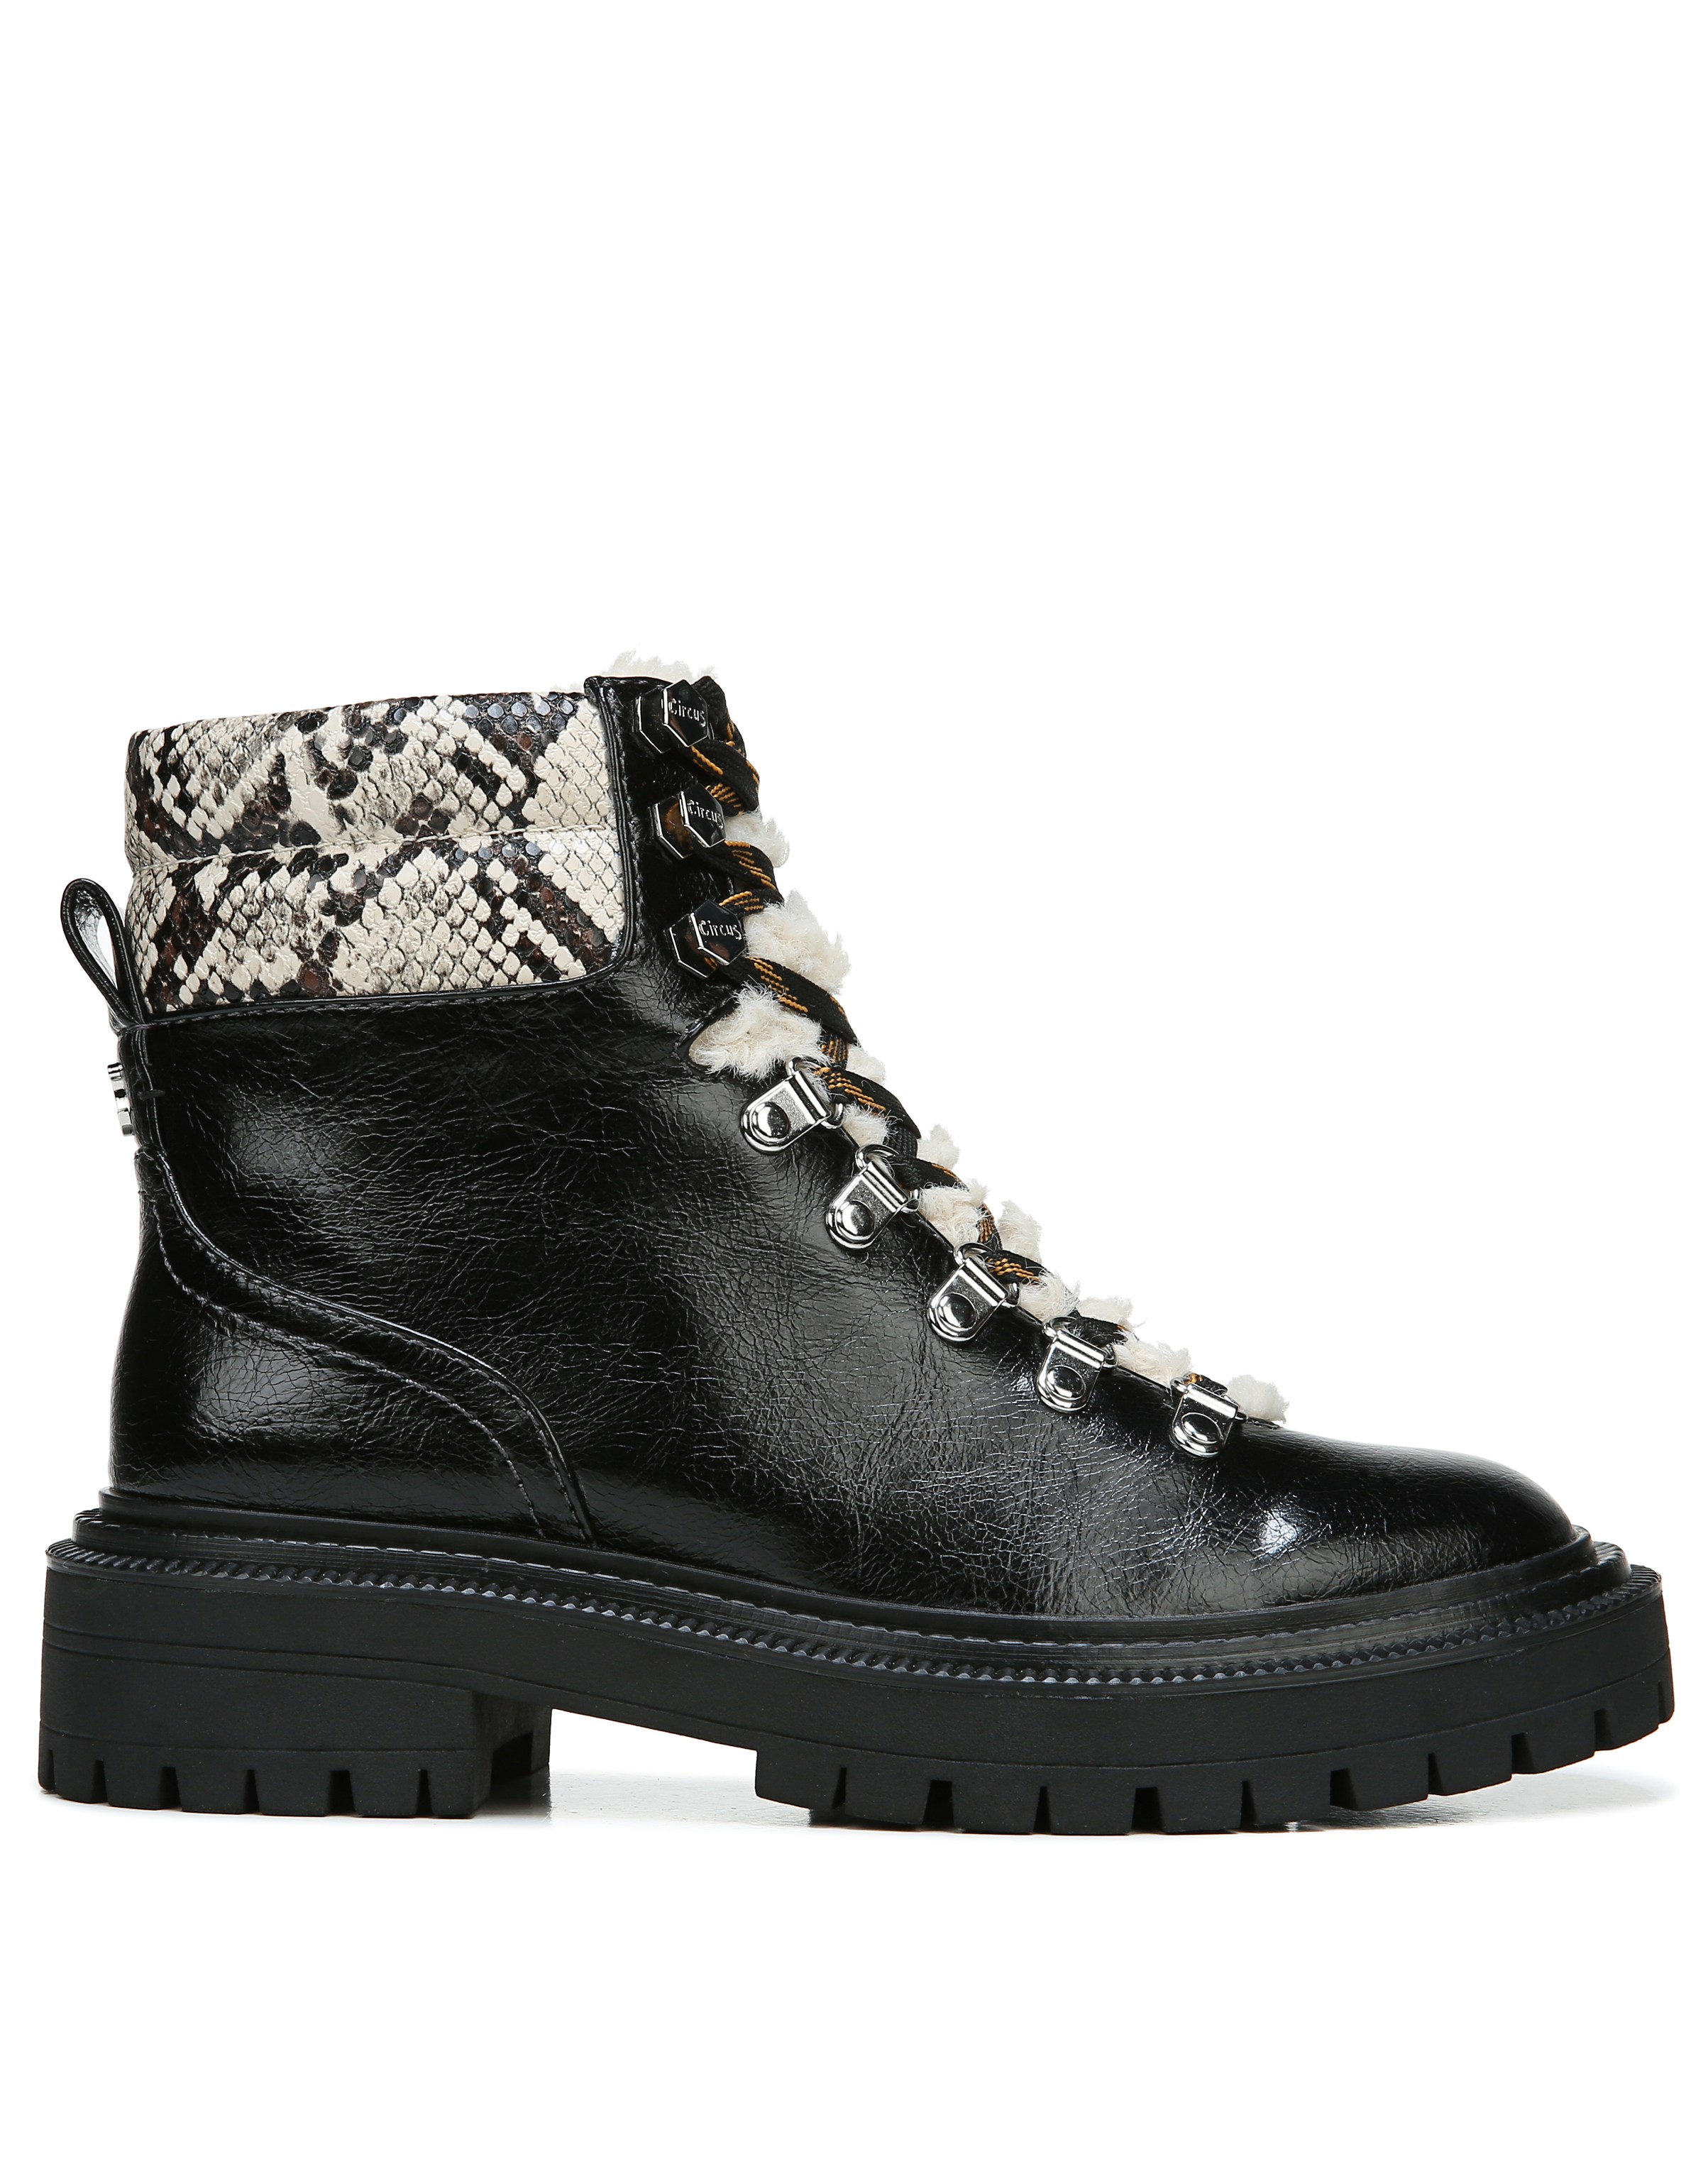 Circus by Sam Edelman Flora Shearling Hiker Boot (Women's) - image 3 of 6